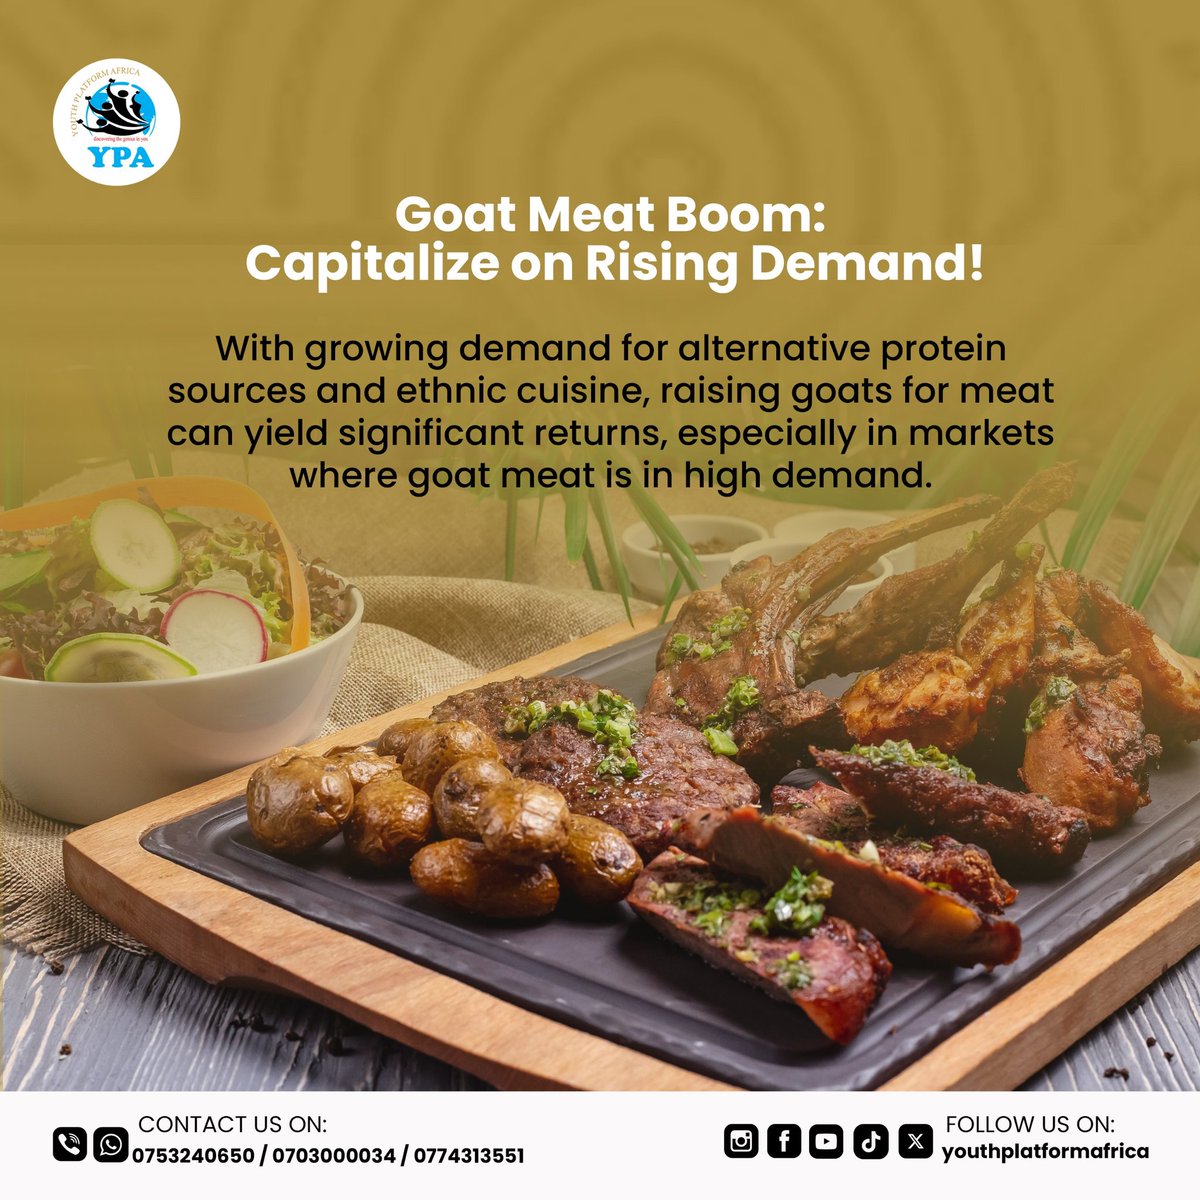 Delicious it looks I know, but have you ever wondered where it comes from? YPA Goats feed on natural grass 💯% which makes its meat the best to consume. #Eathealthyfoods #lovelife #healthytip #YPABees #YPAGoats #YPAPasture enjoy your money